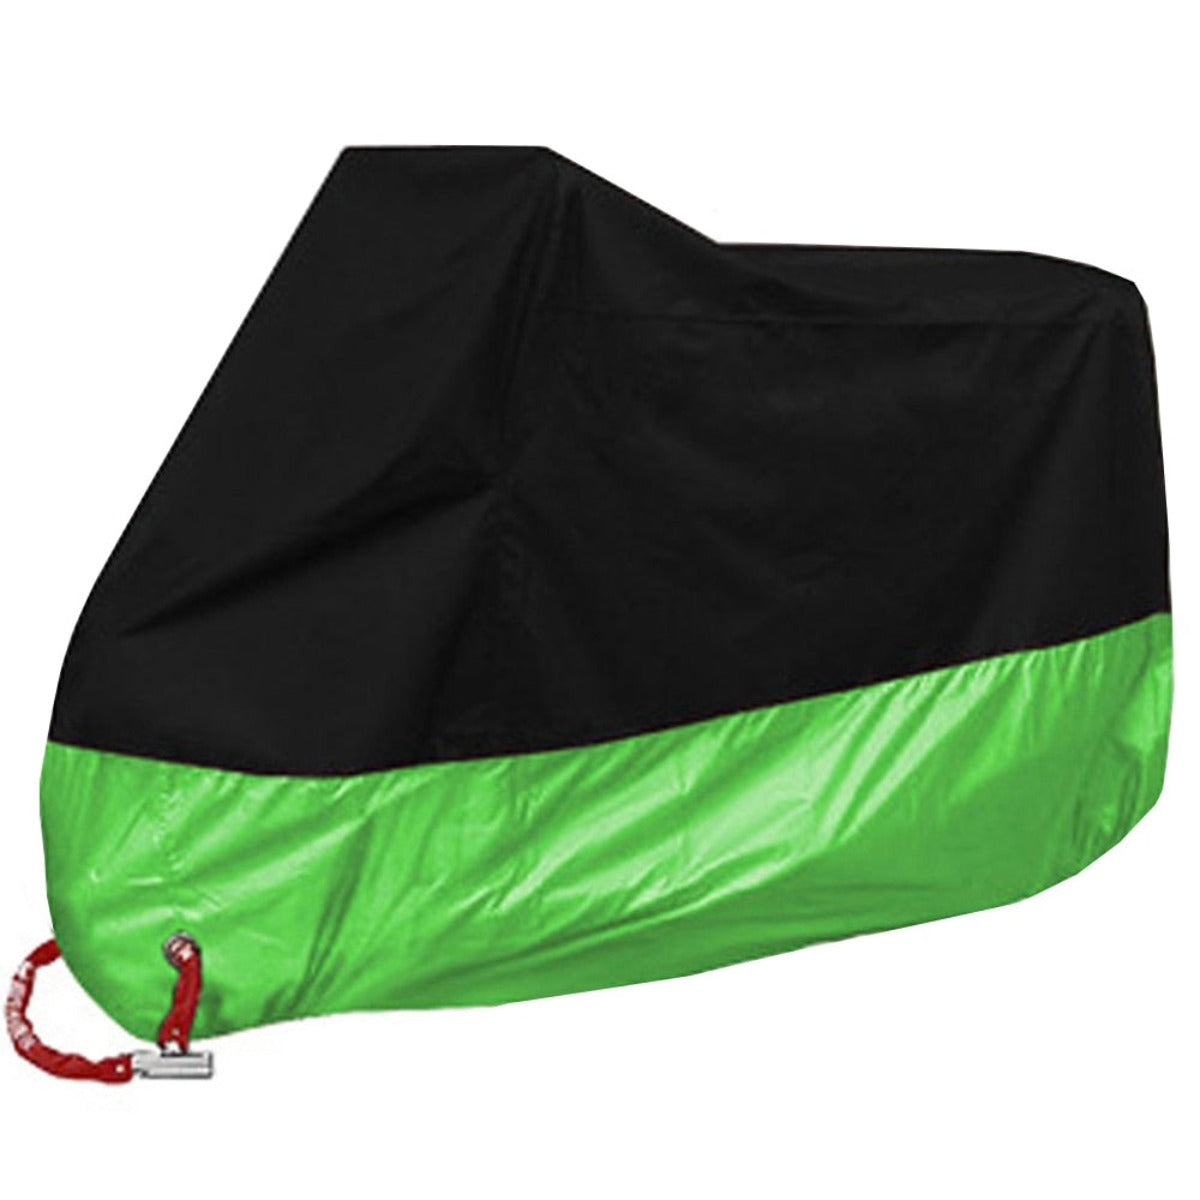 A Waterproof Protective Motorcycle Cover on a white background.